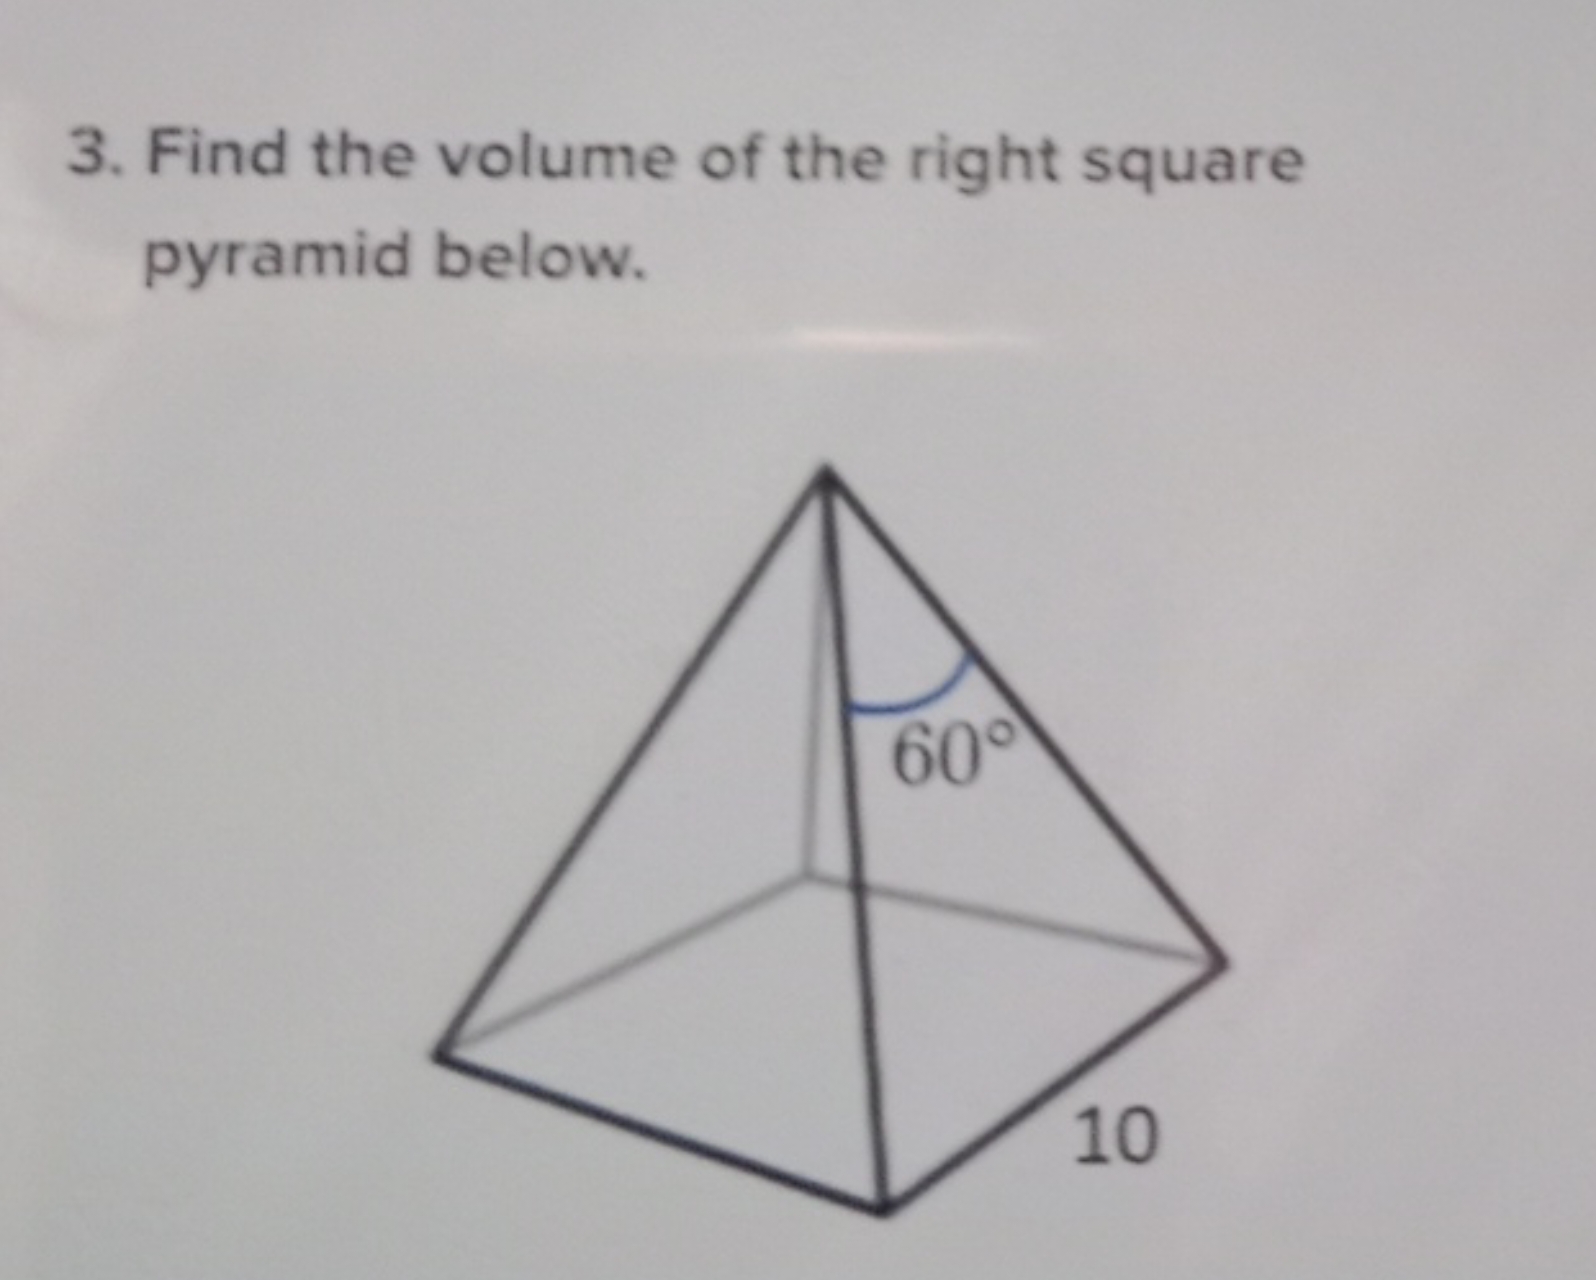 3. Find the volume of the right square pyramid below.
